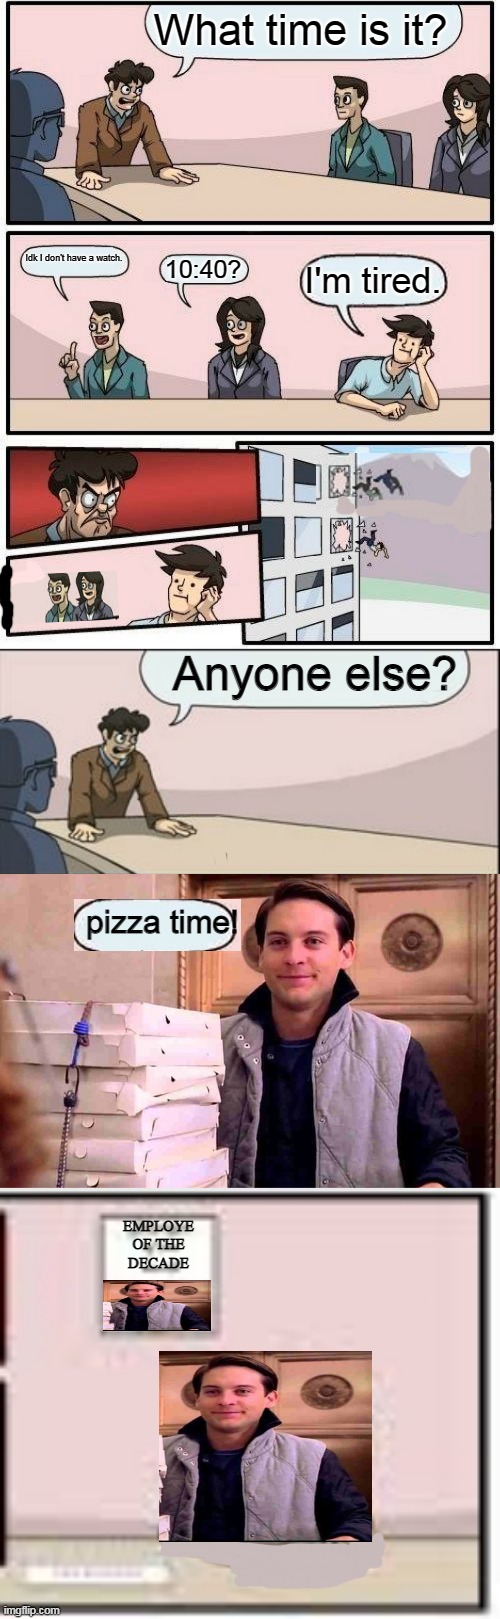 This title is misleading... So who wants pasta? | What time is it? Idk I don't have a watch. 10:40? I'm tired. Anyone else? pizza time! EMPLOYE OF THE DECADE | image tagged in memes,boardroom meeting suggestion,boardroom meeting sugg 2,pizza time,boardroom meeting good ending,funny | made w/ Imgflip meme maker